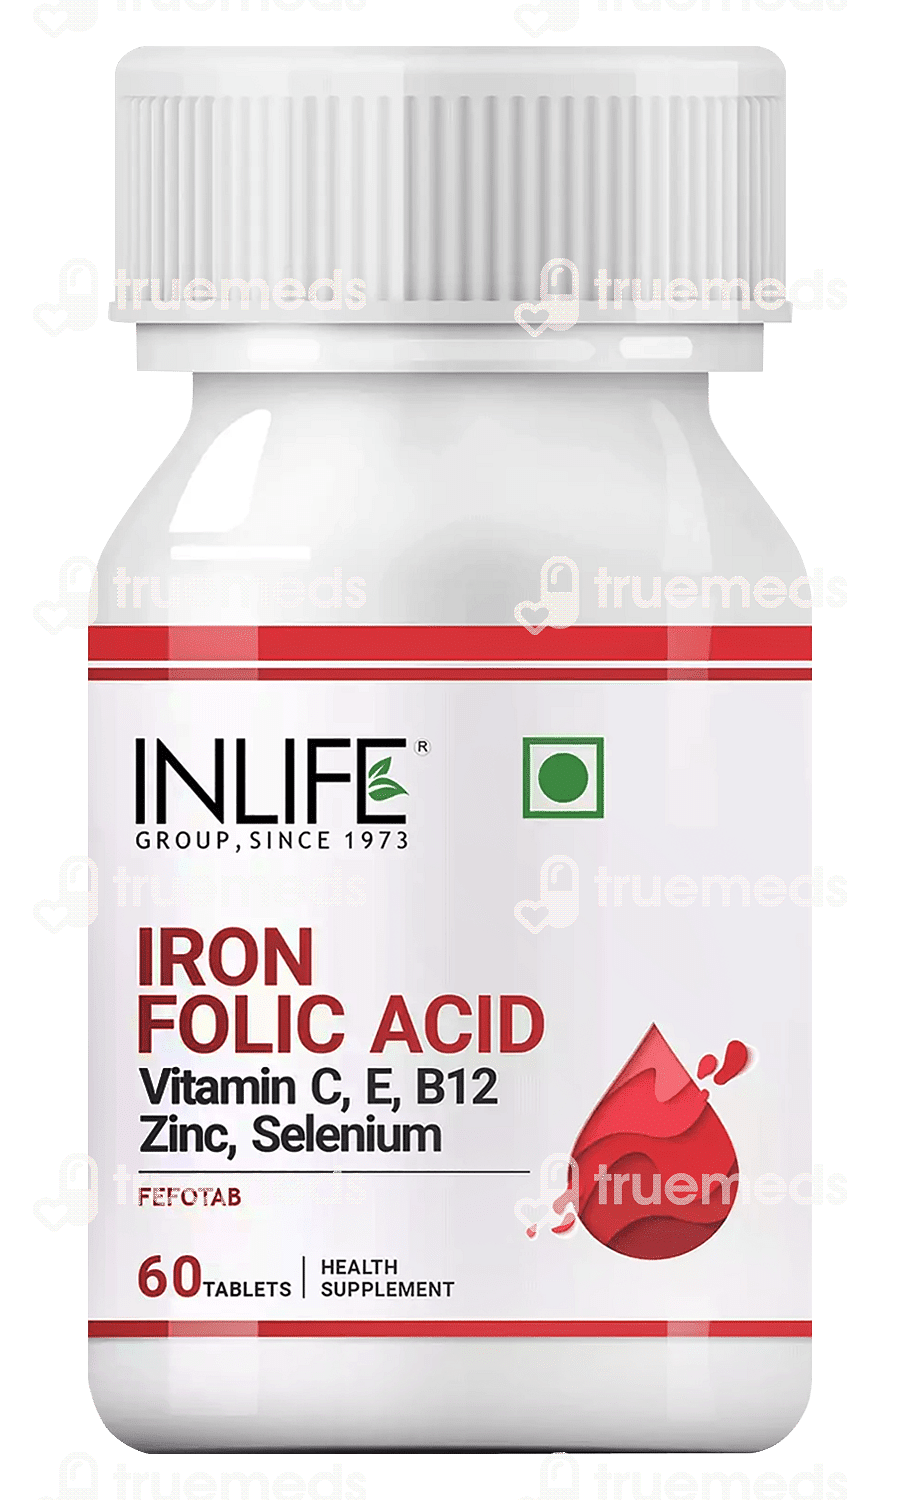 Inlife Iron Folic Acid Supplement Tablet 60 Uses Side Effects Dosage Price Truemeds 5991